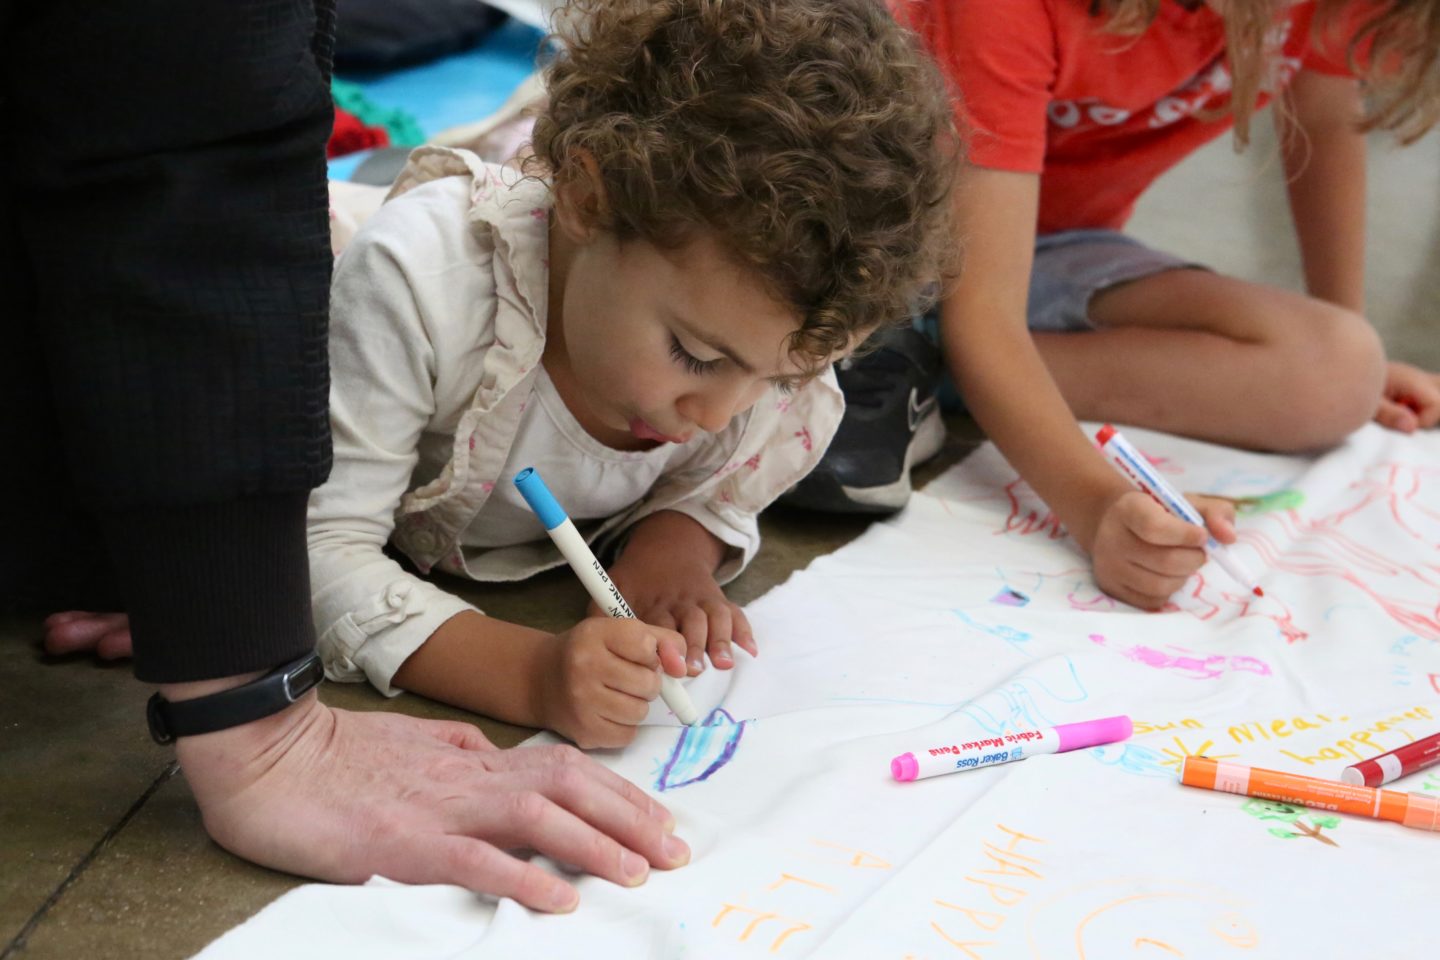 An image of children drawing on fabric